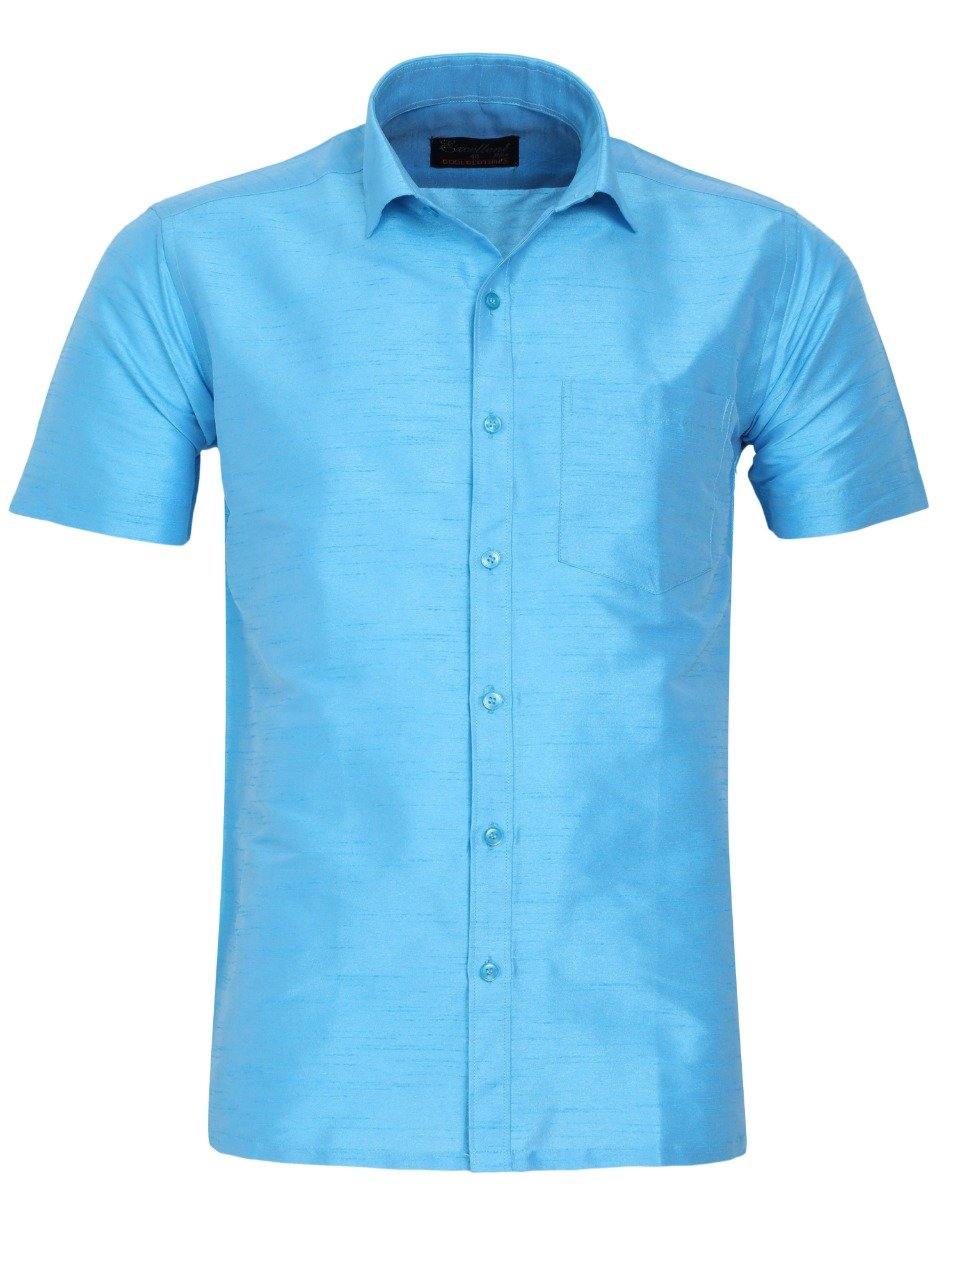 Traditional Raw Silk Shirt for men - full sleeve (Blue) - 90029A